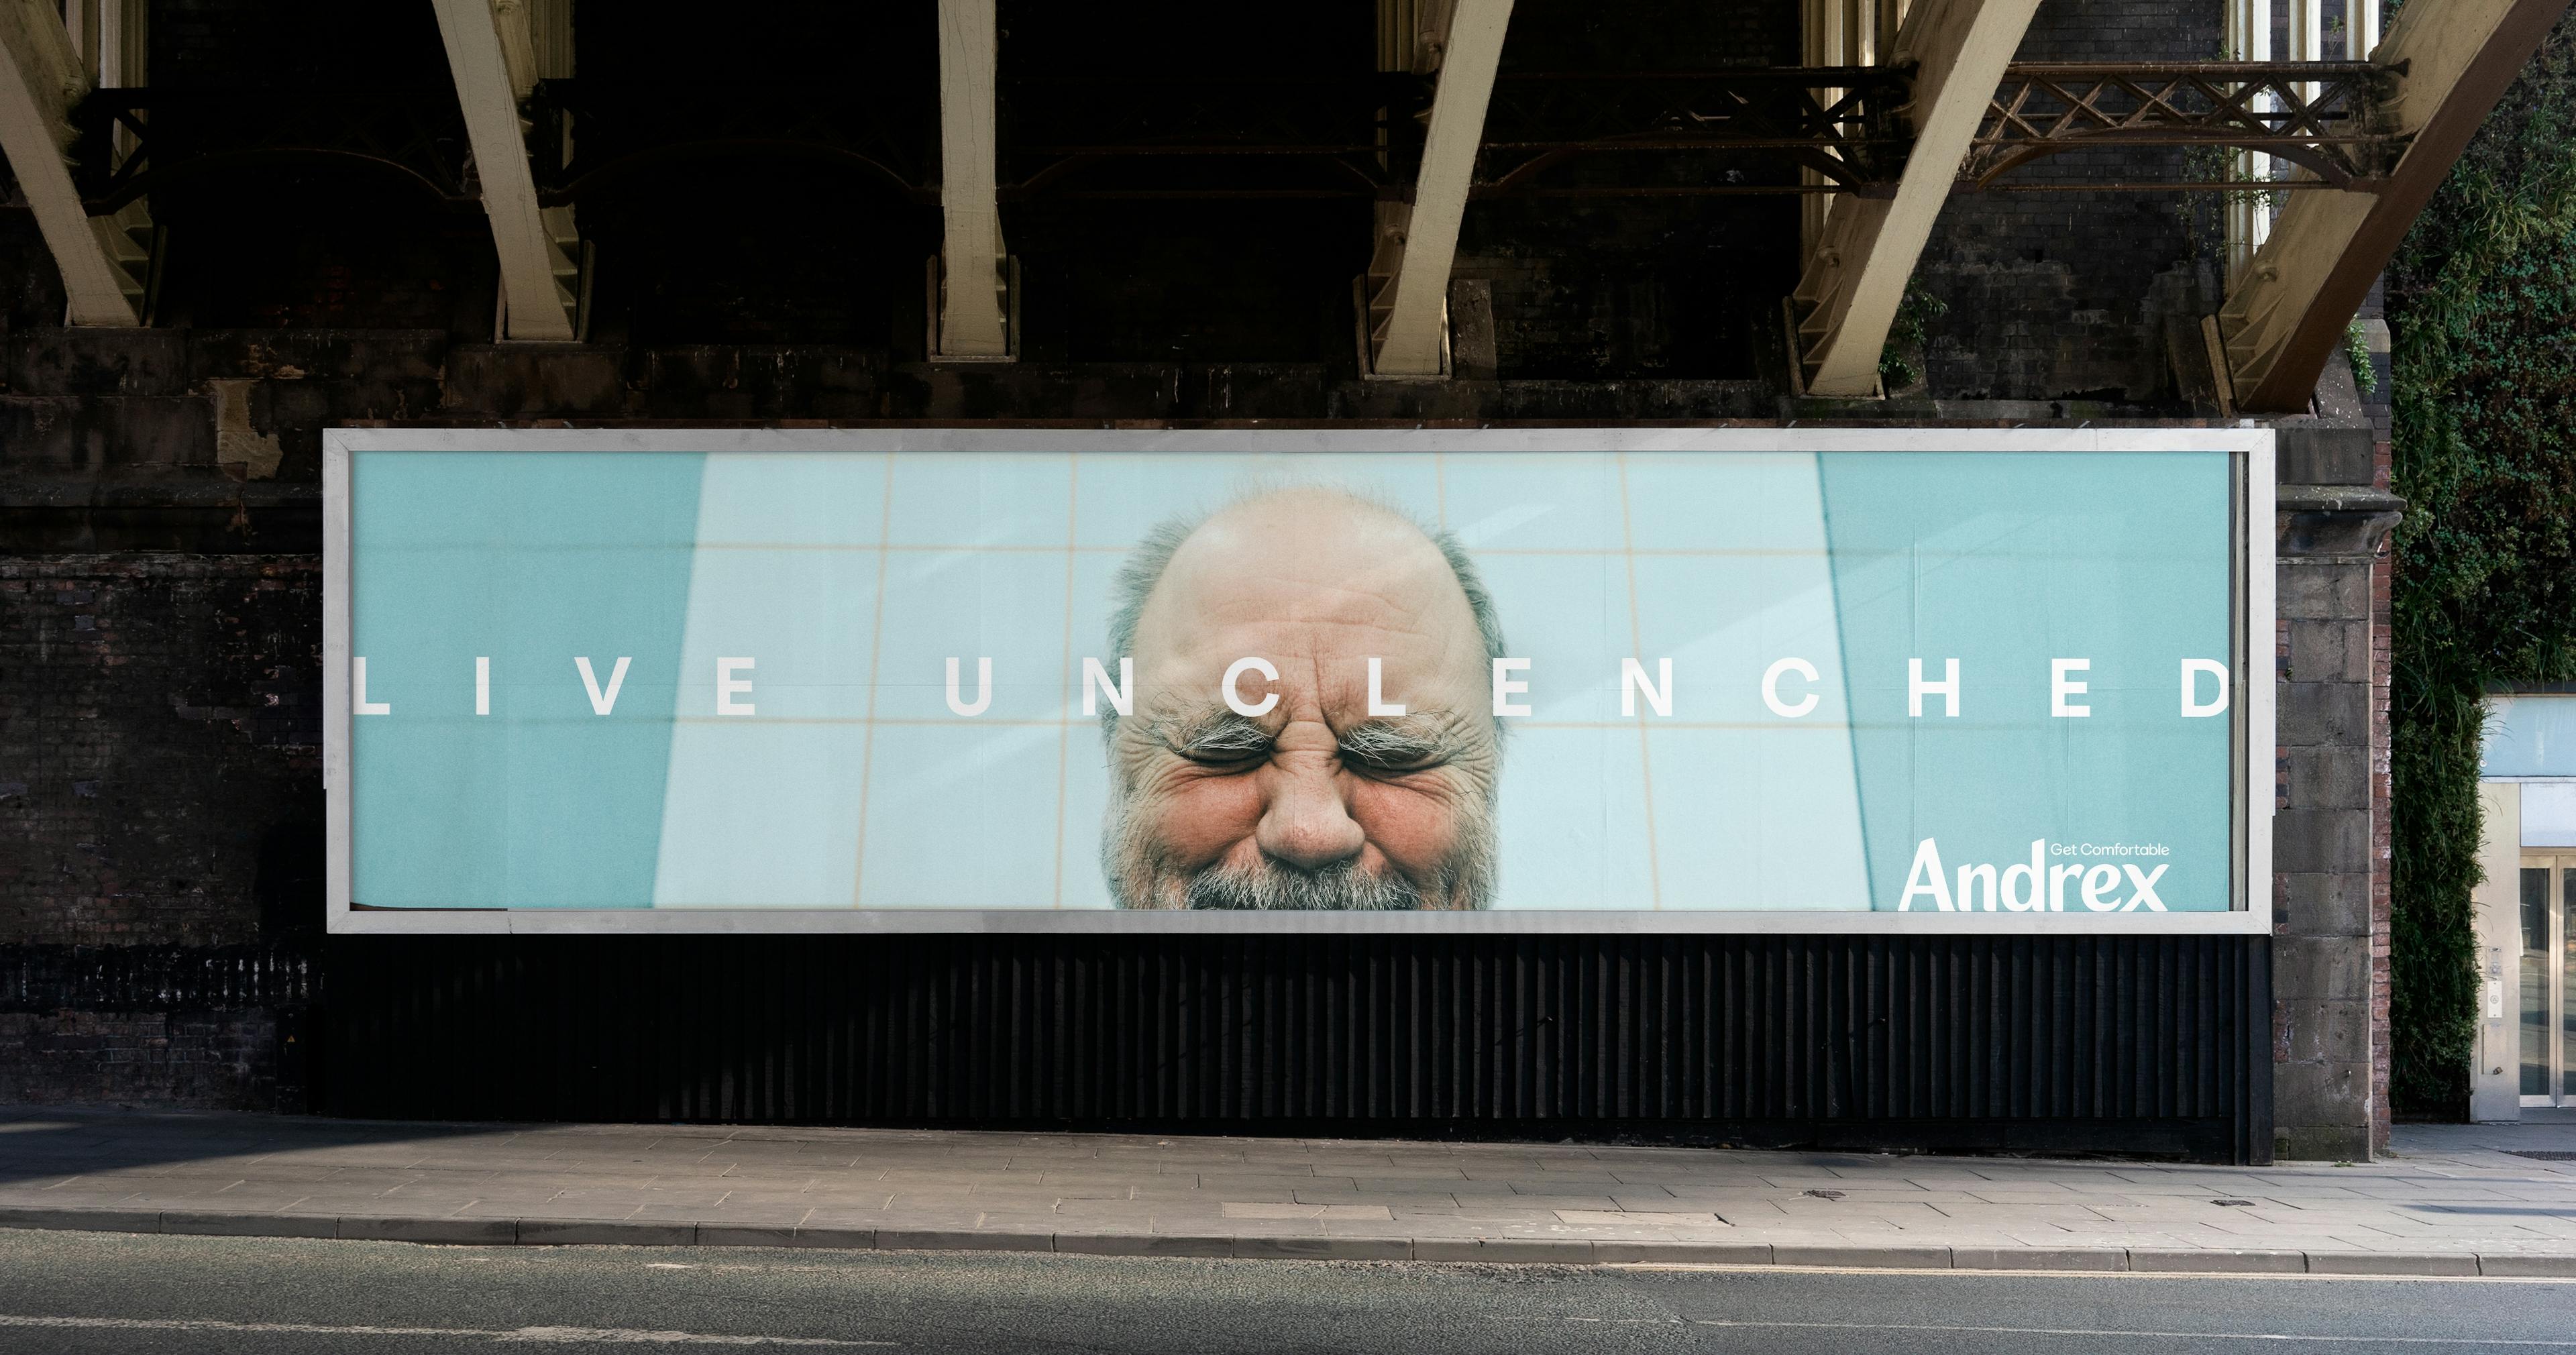 Billboard advertisement featuring a close-up image of a man's smiling face with eyes closed, accompanied by the slogan "Live Unclenched" and the Andrex brand logo.